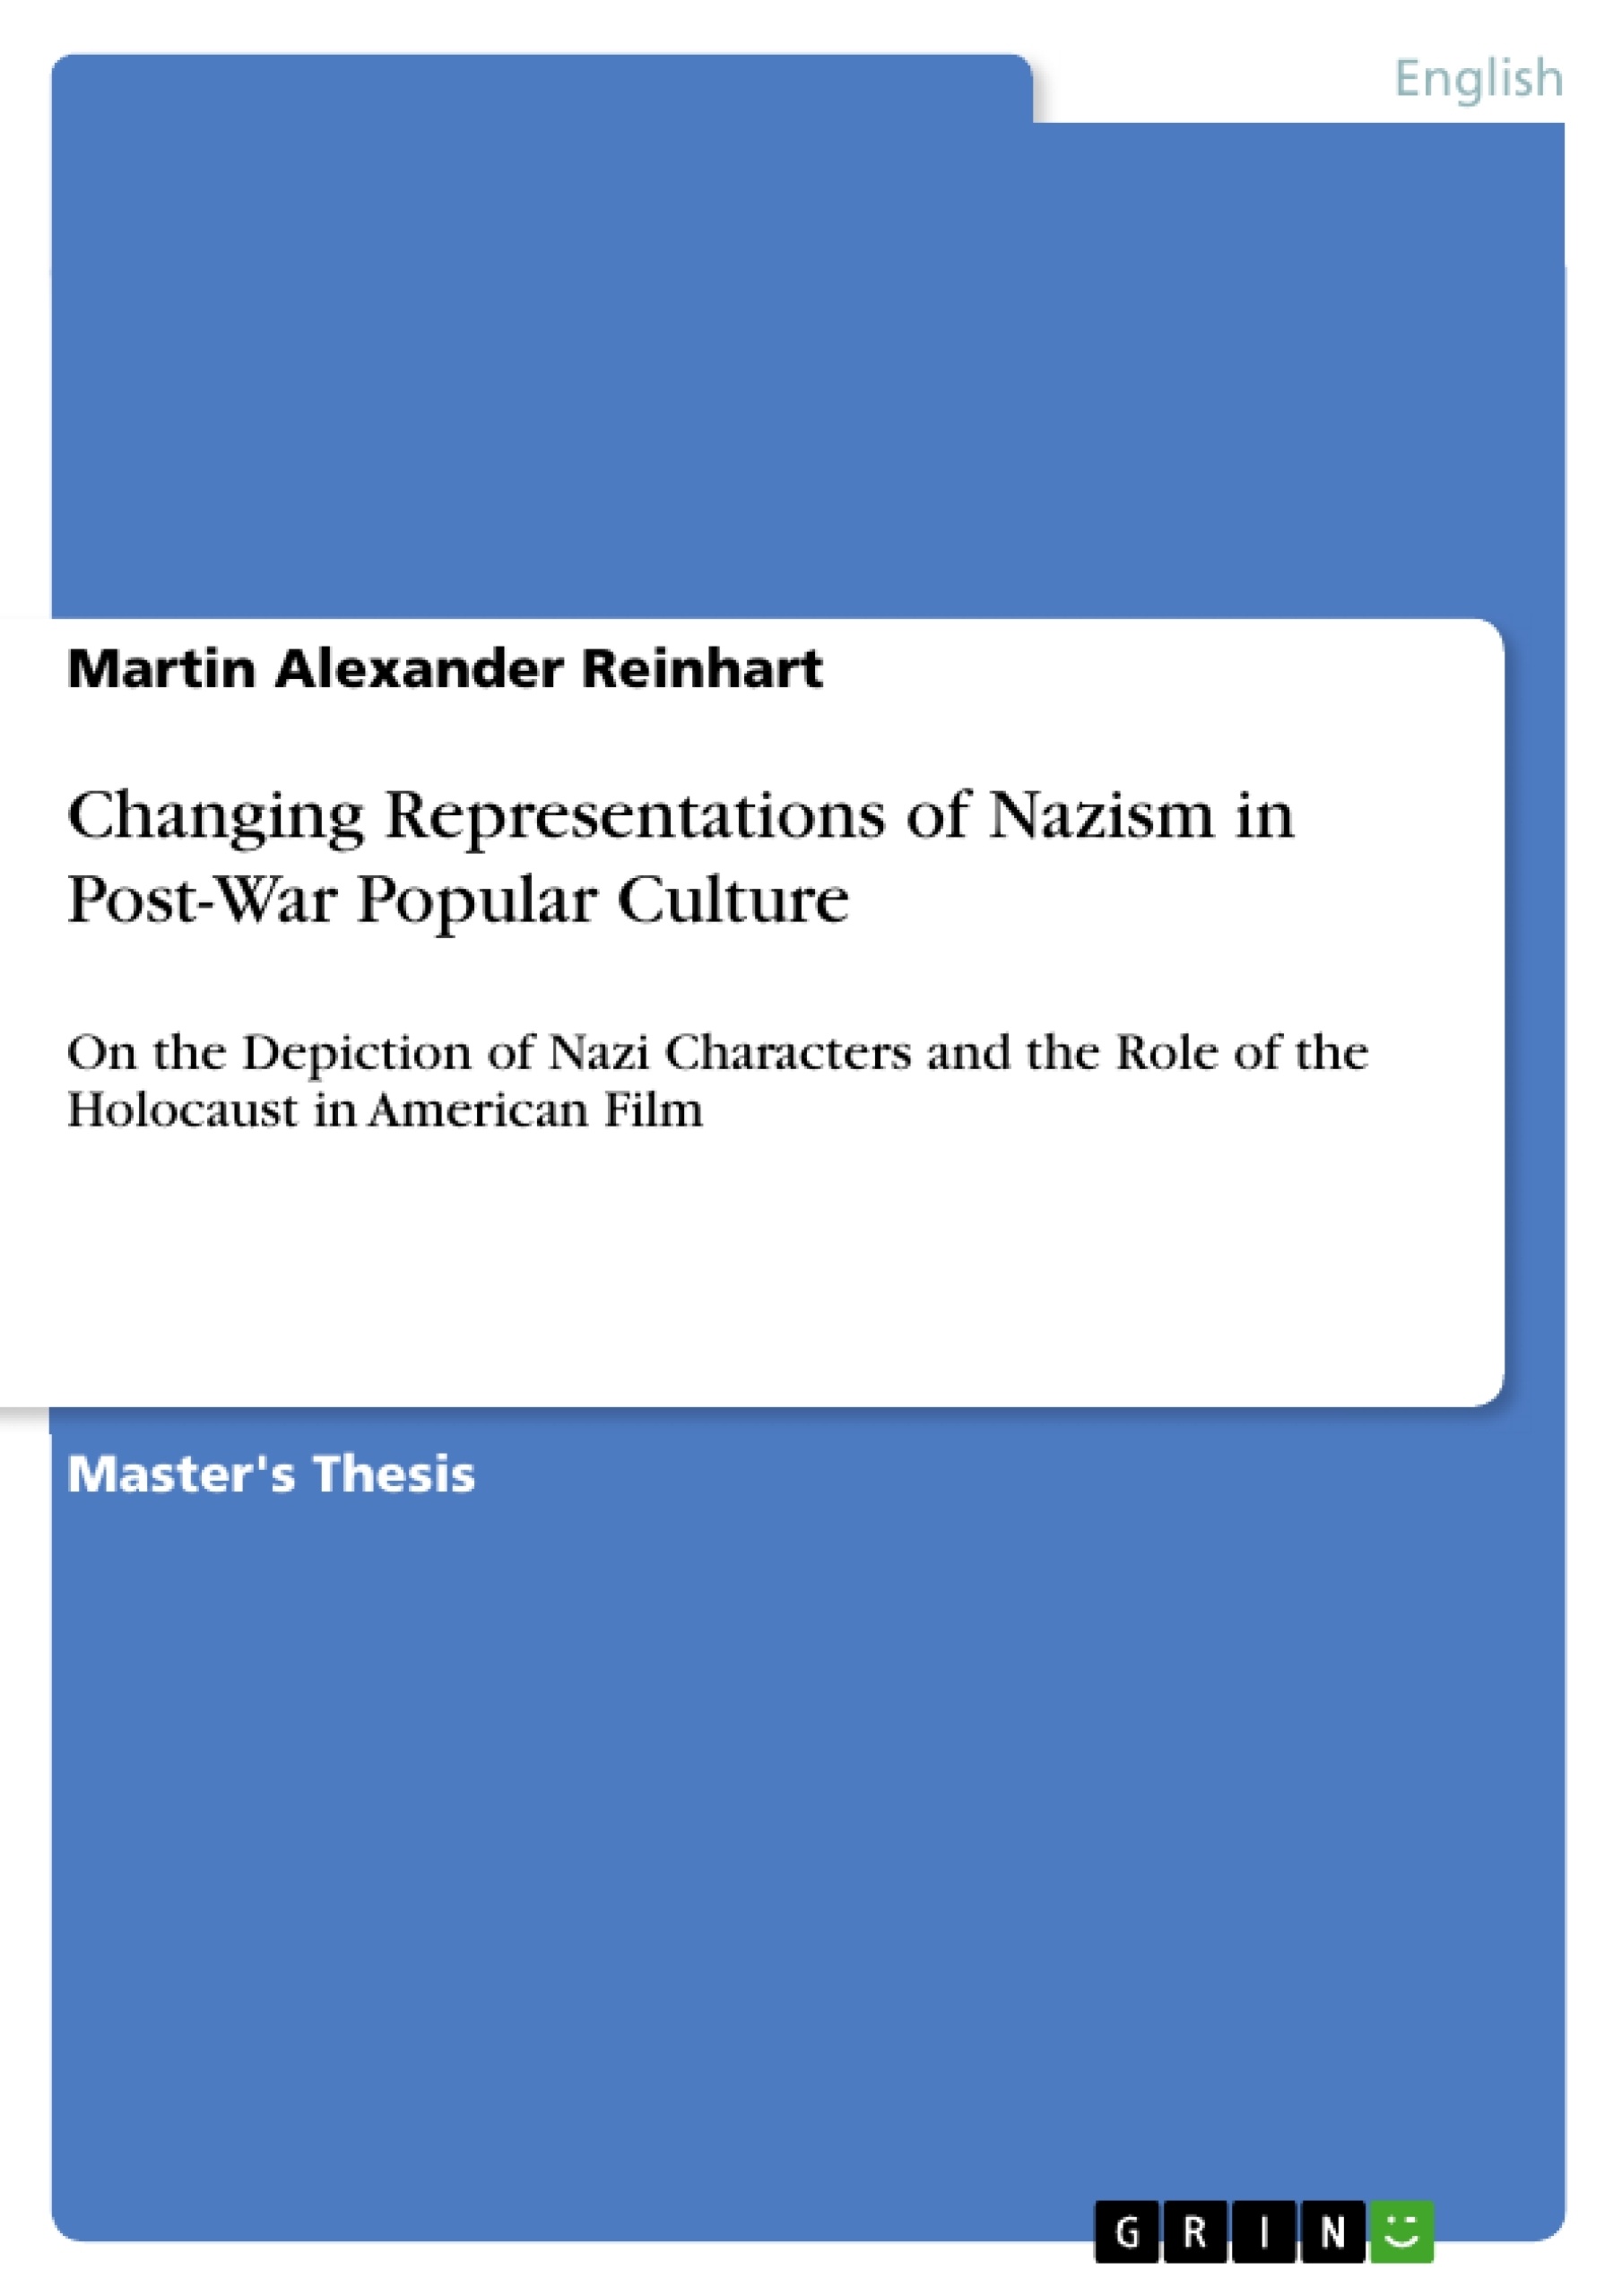 Title: Changing Representations of Nazism in Post-War Popular Culture